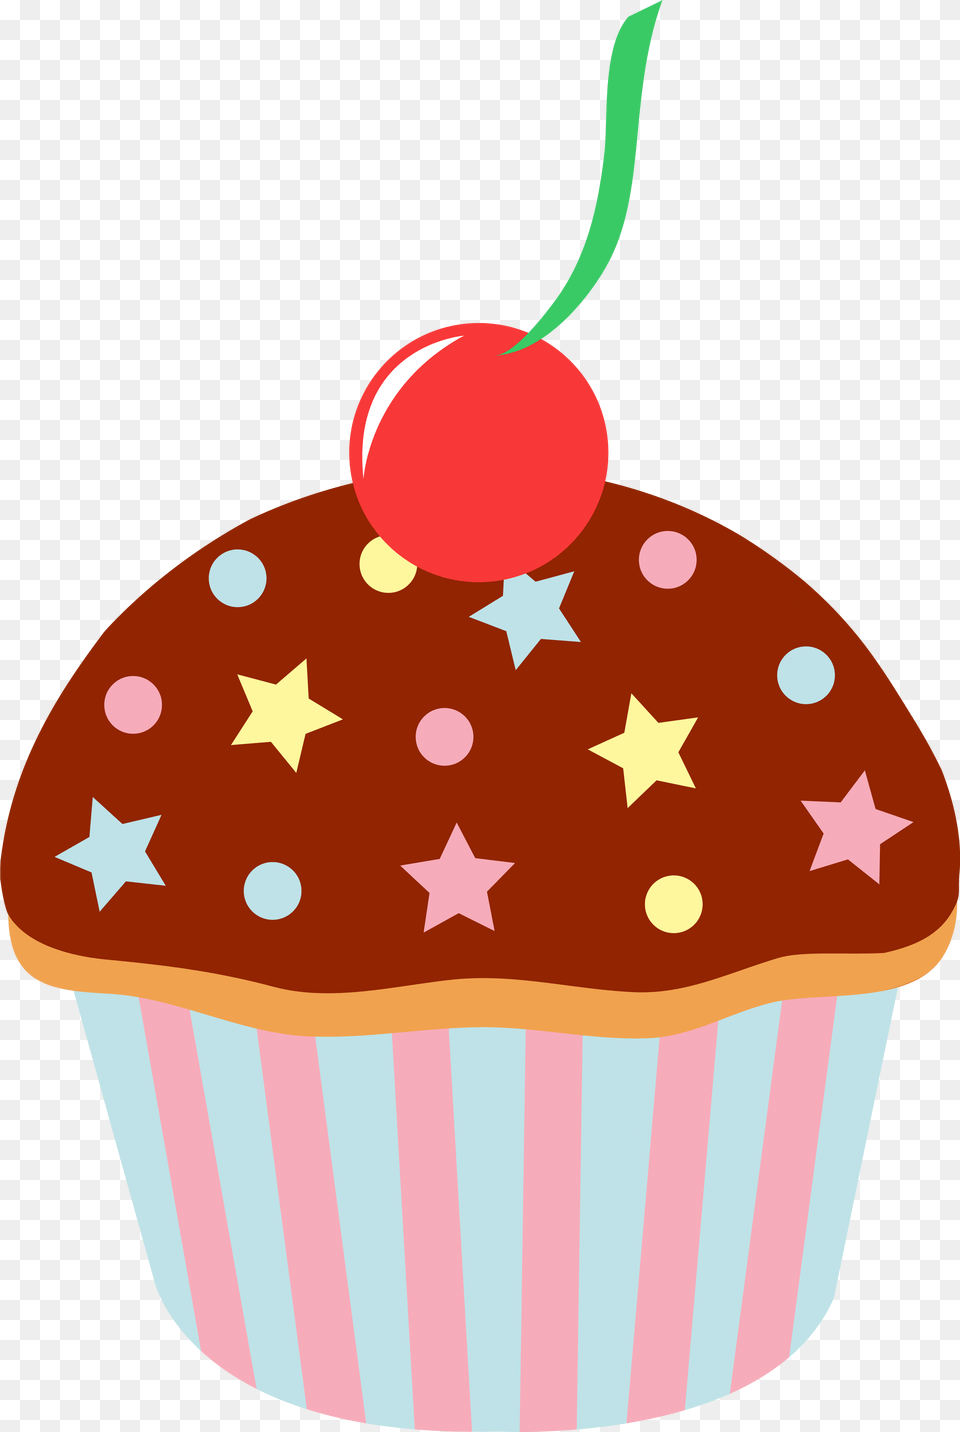 Cute Cupcake Clipart Cartoon Cakes And Sweets, Cake, Cream, Dessert, Food Png Image